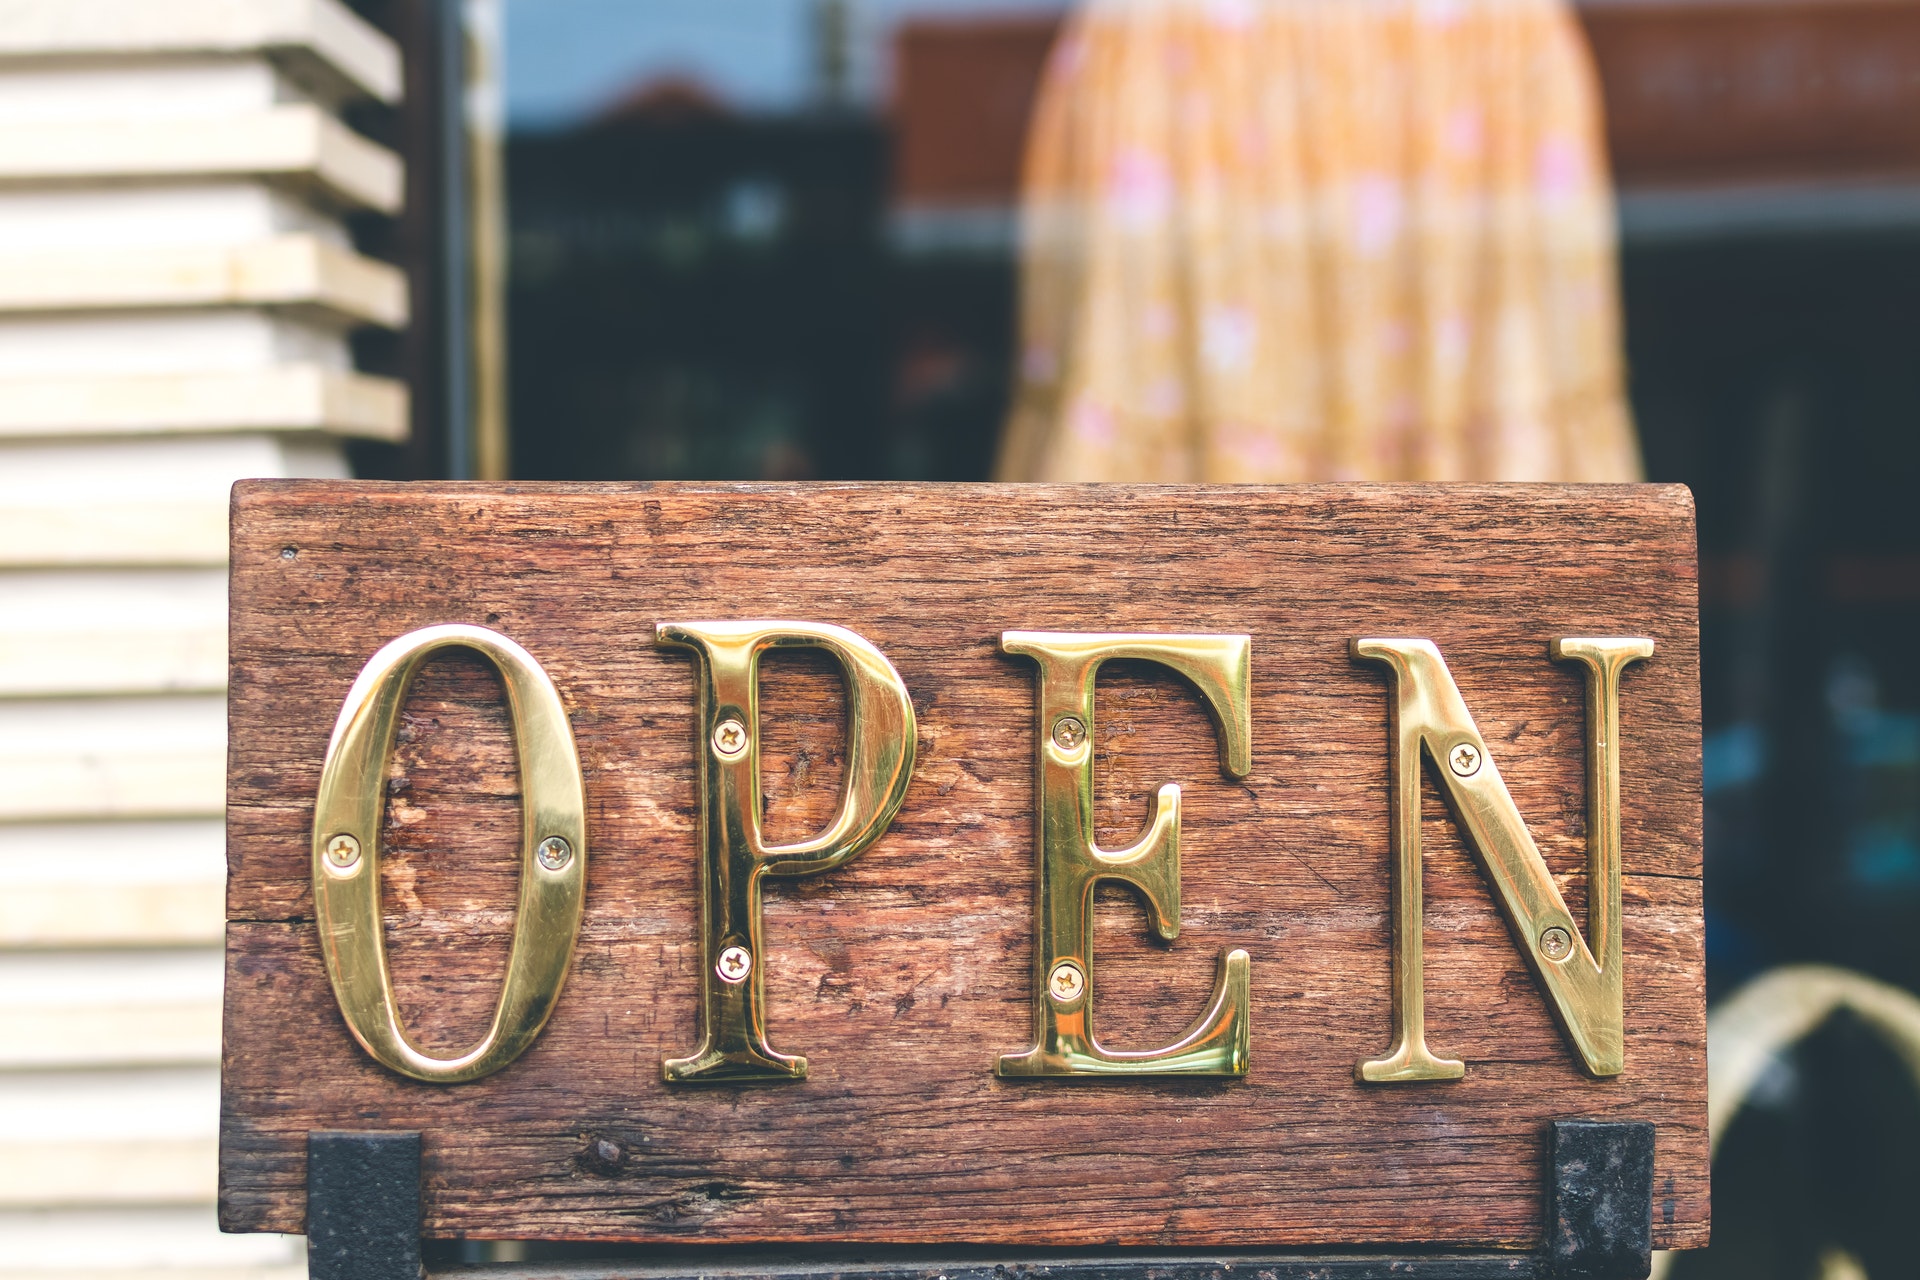 How to Open a Restaurant in 7 Simple Steps